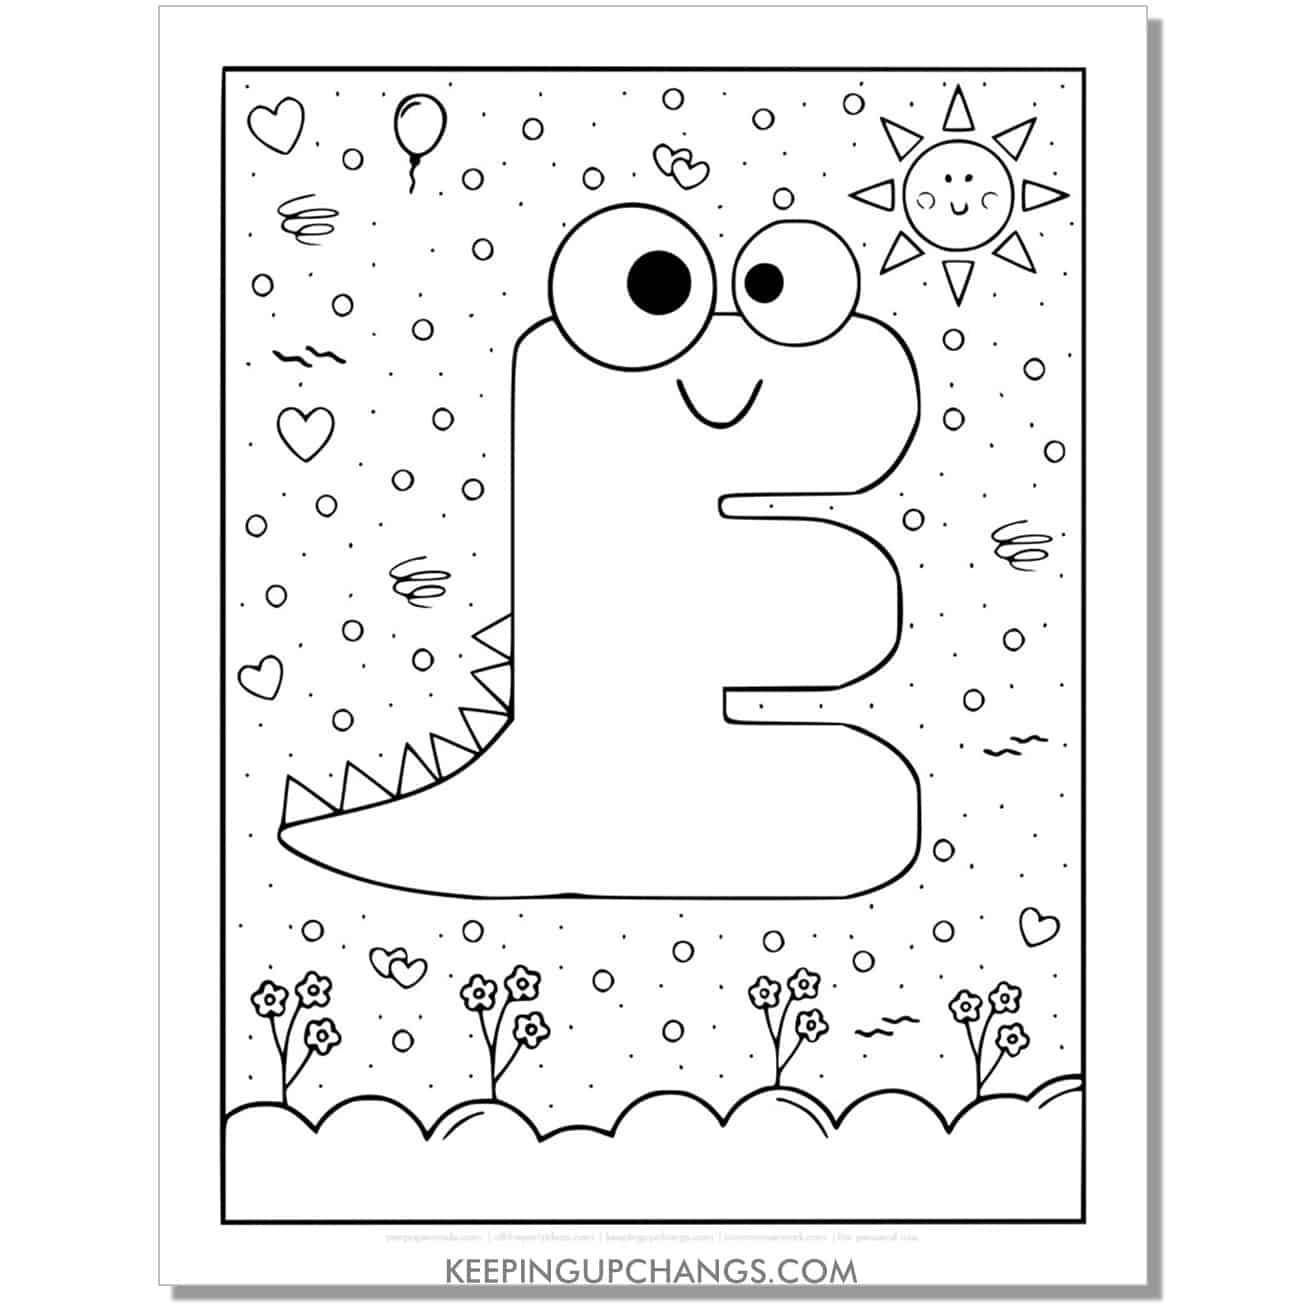 cute e coloring page with monster dinosaur letter.